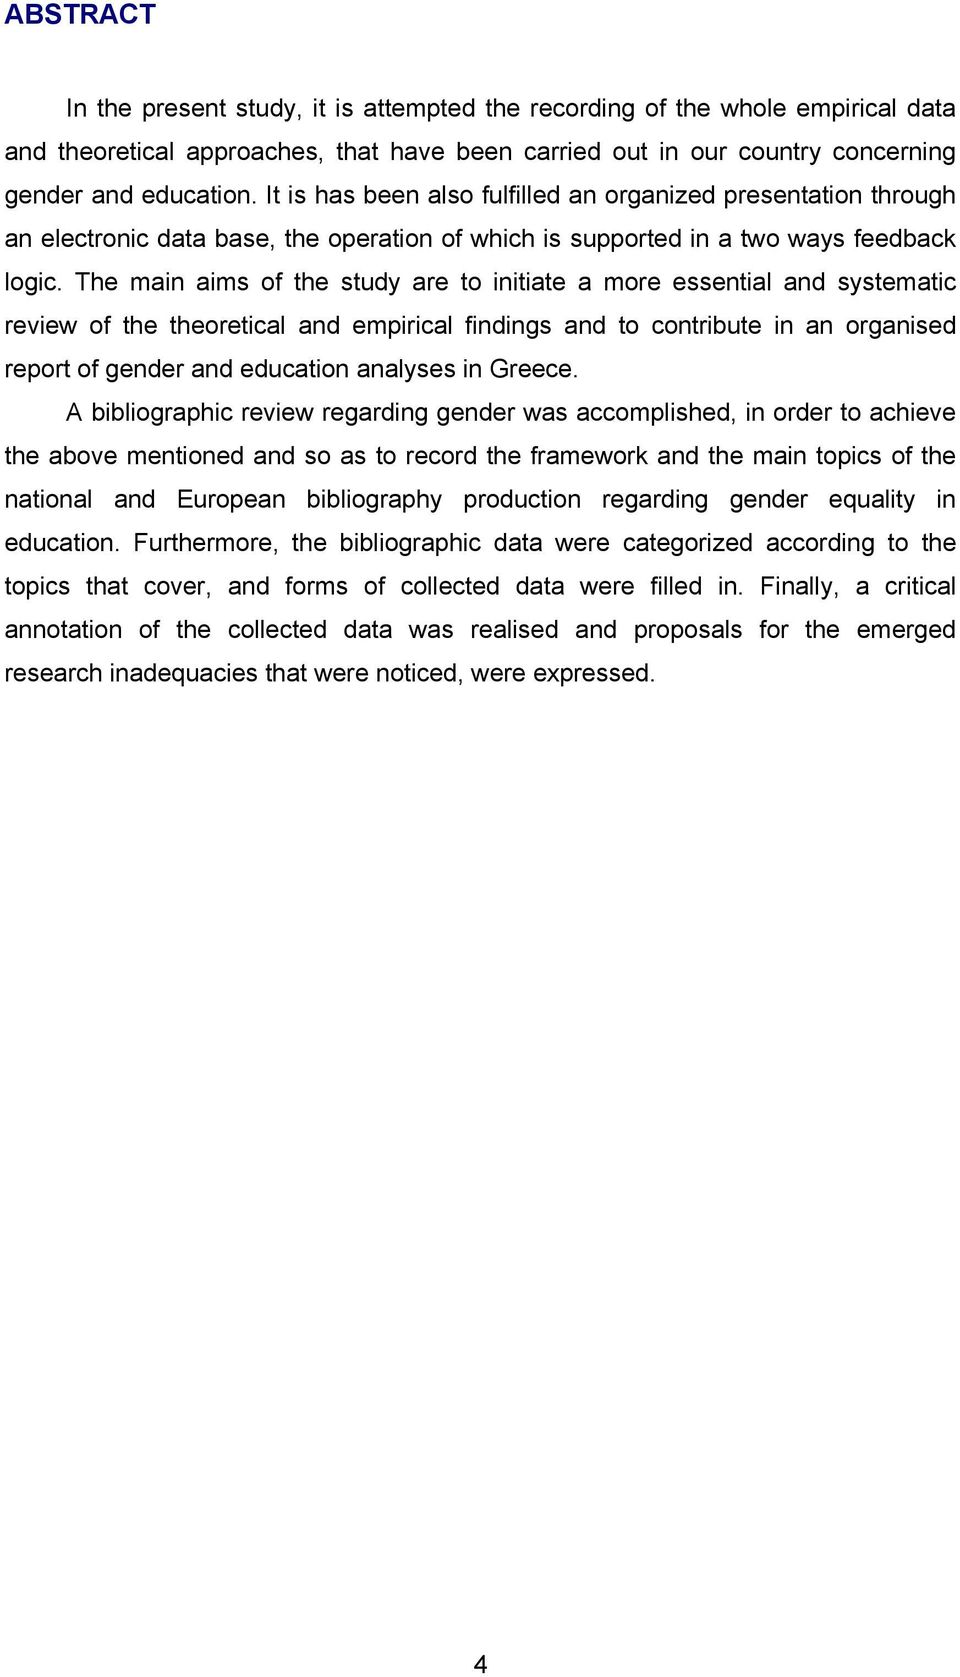 The main aims of the study are to initiate a more essential and systematic review of the theoretical and empirical findings and to contribute in an organised report of gender and education analyses